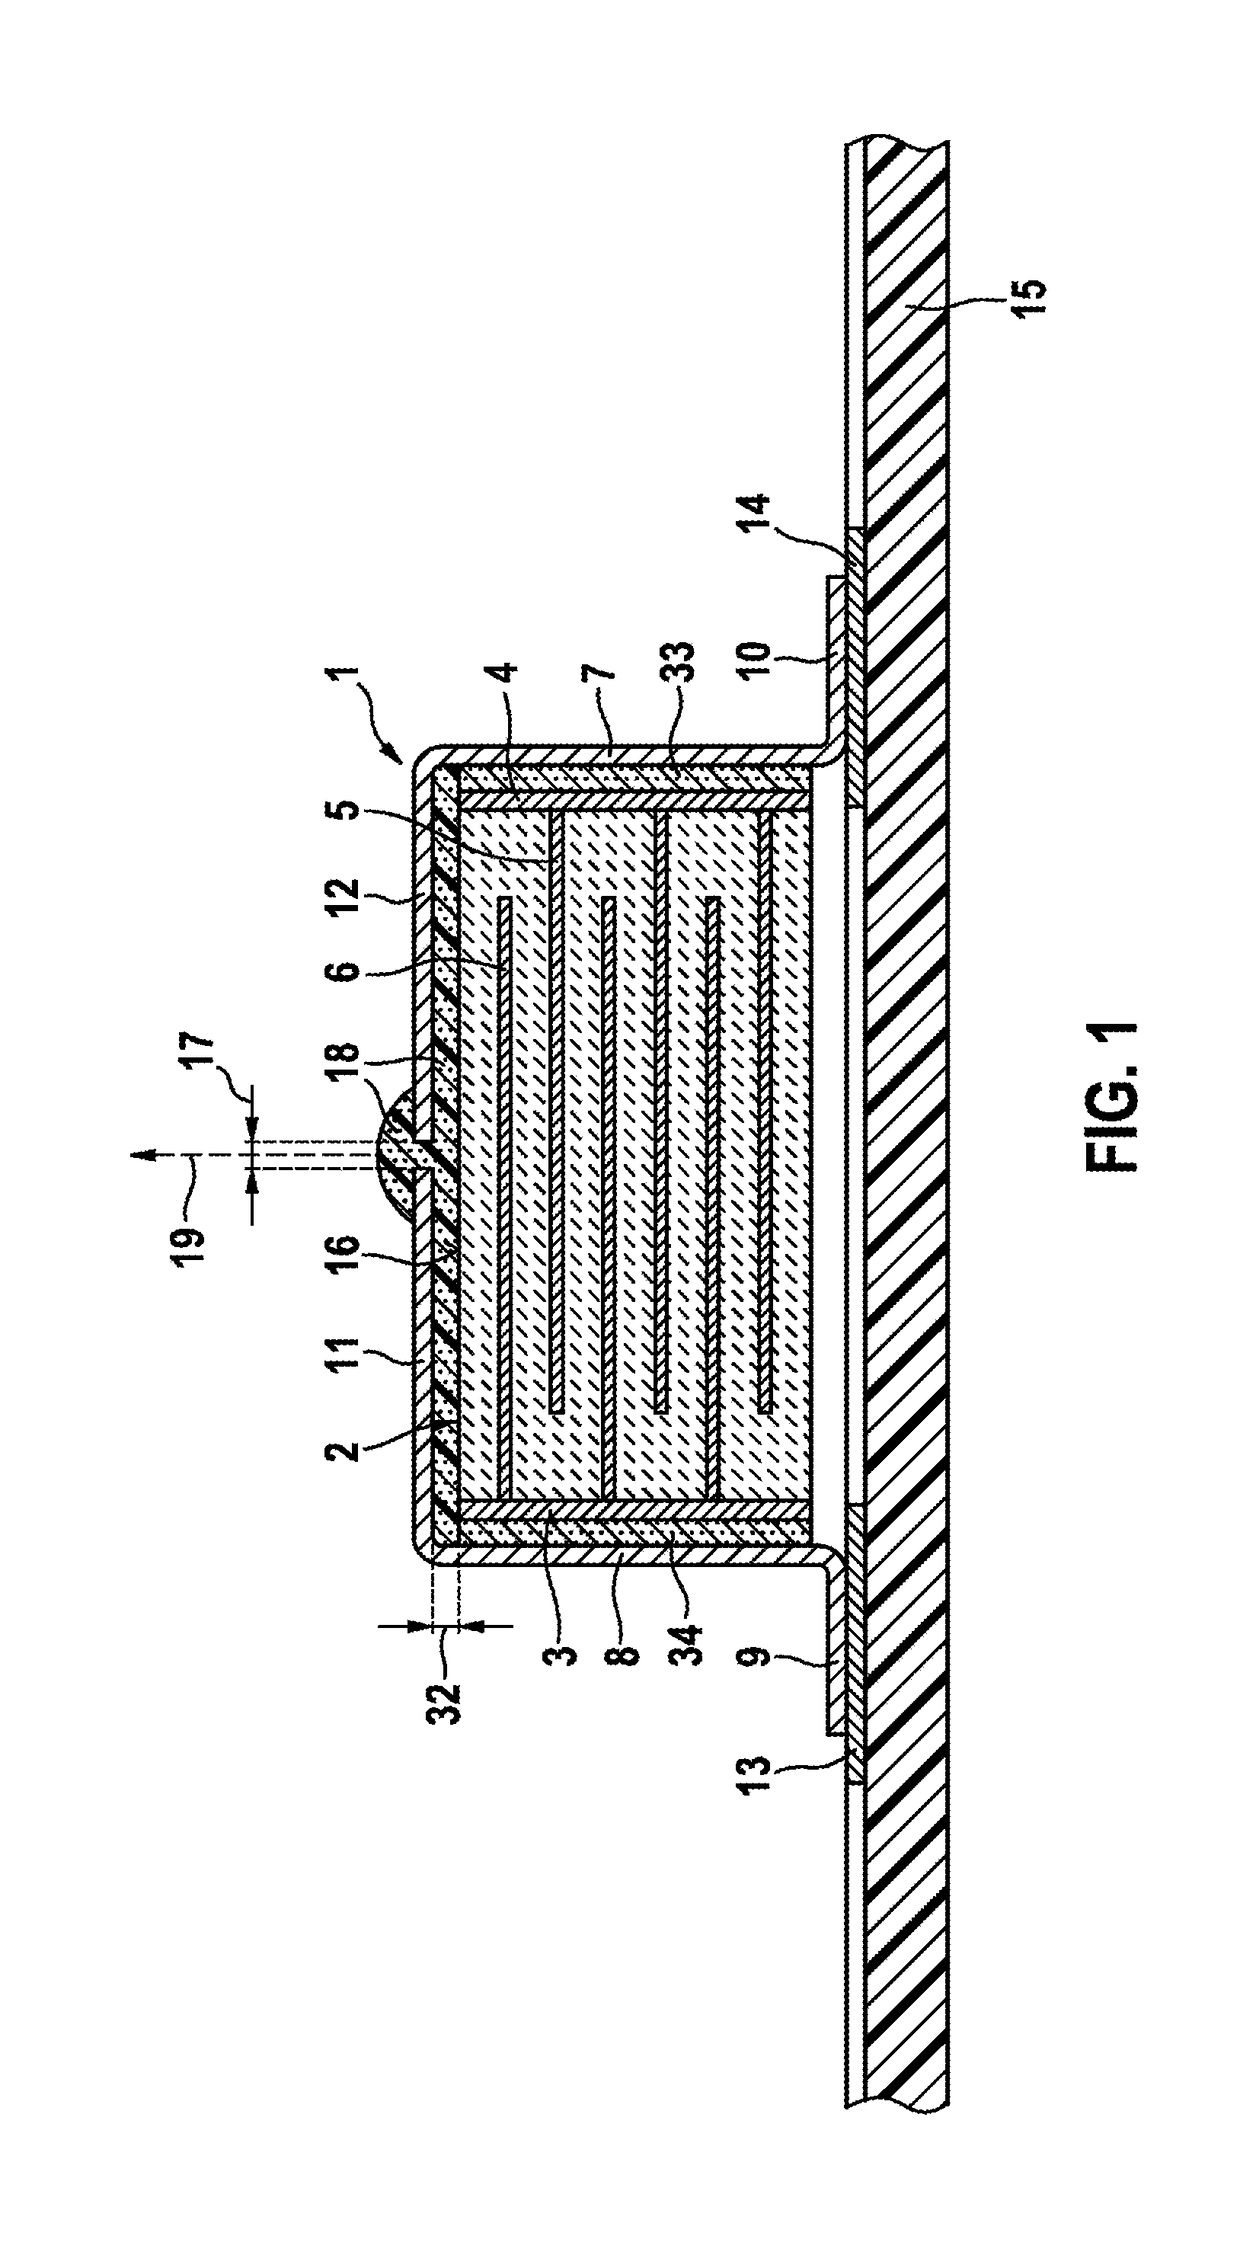 Capacitive component having a heat-conducting connection element